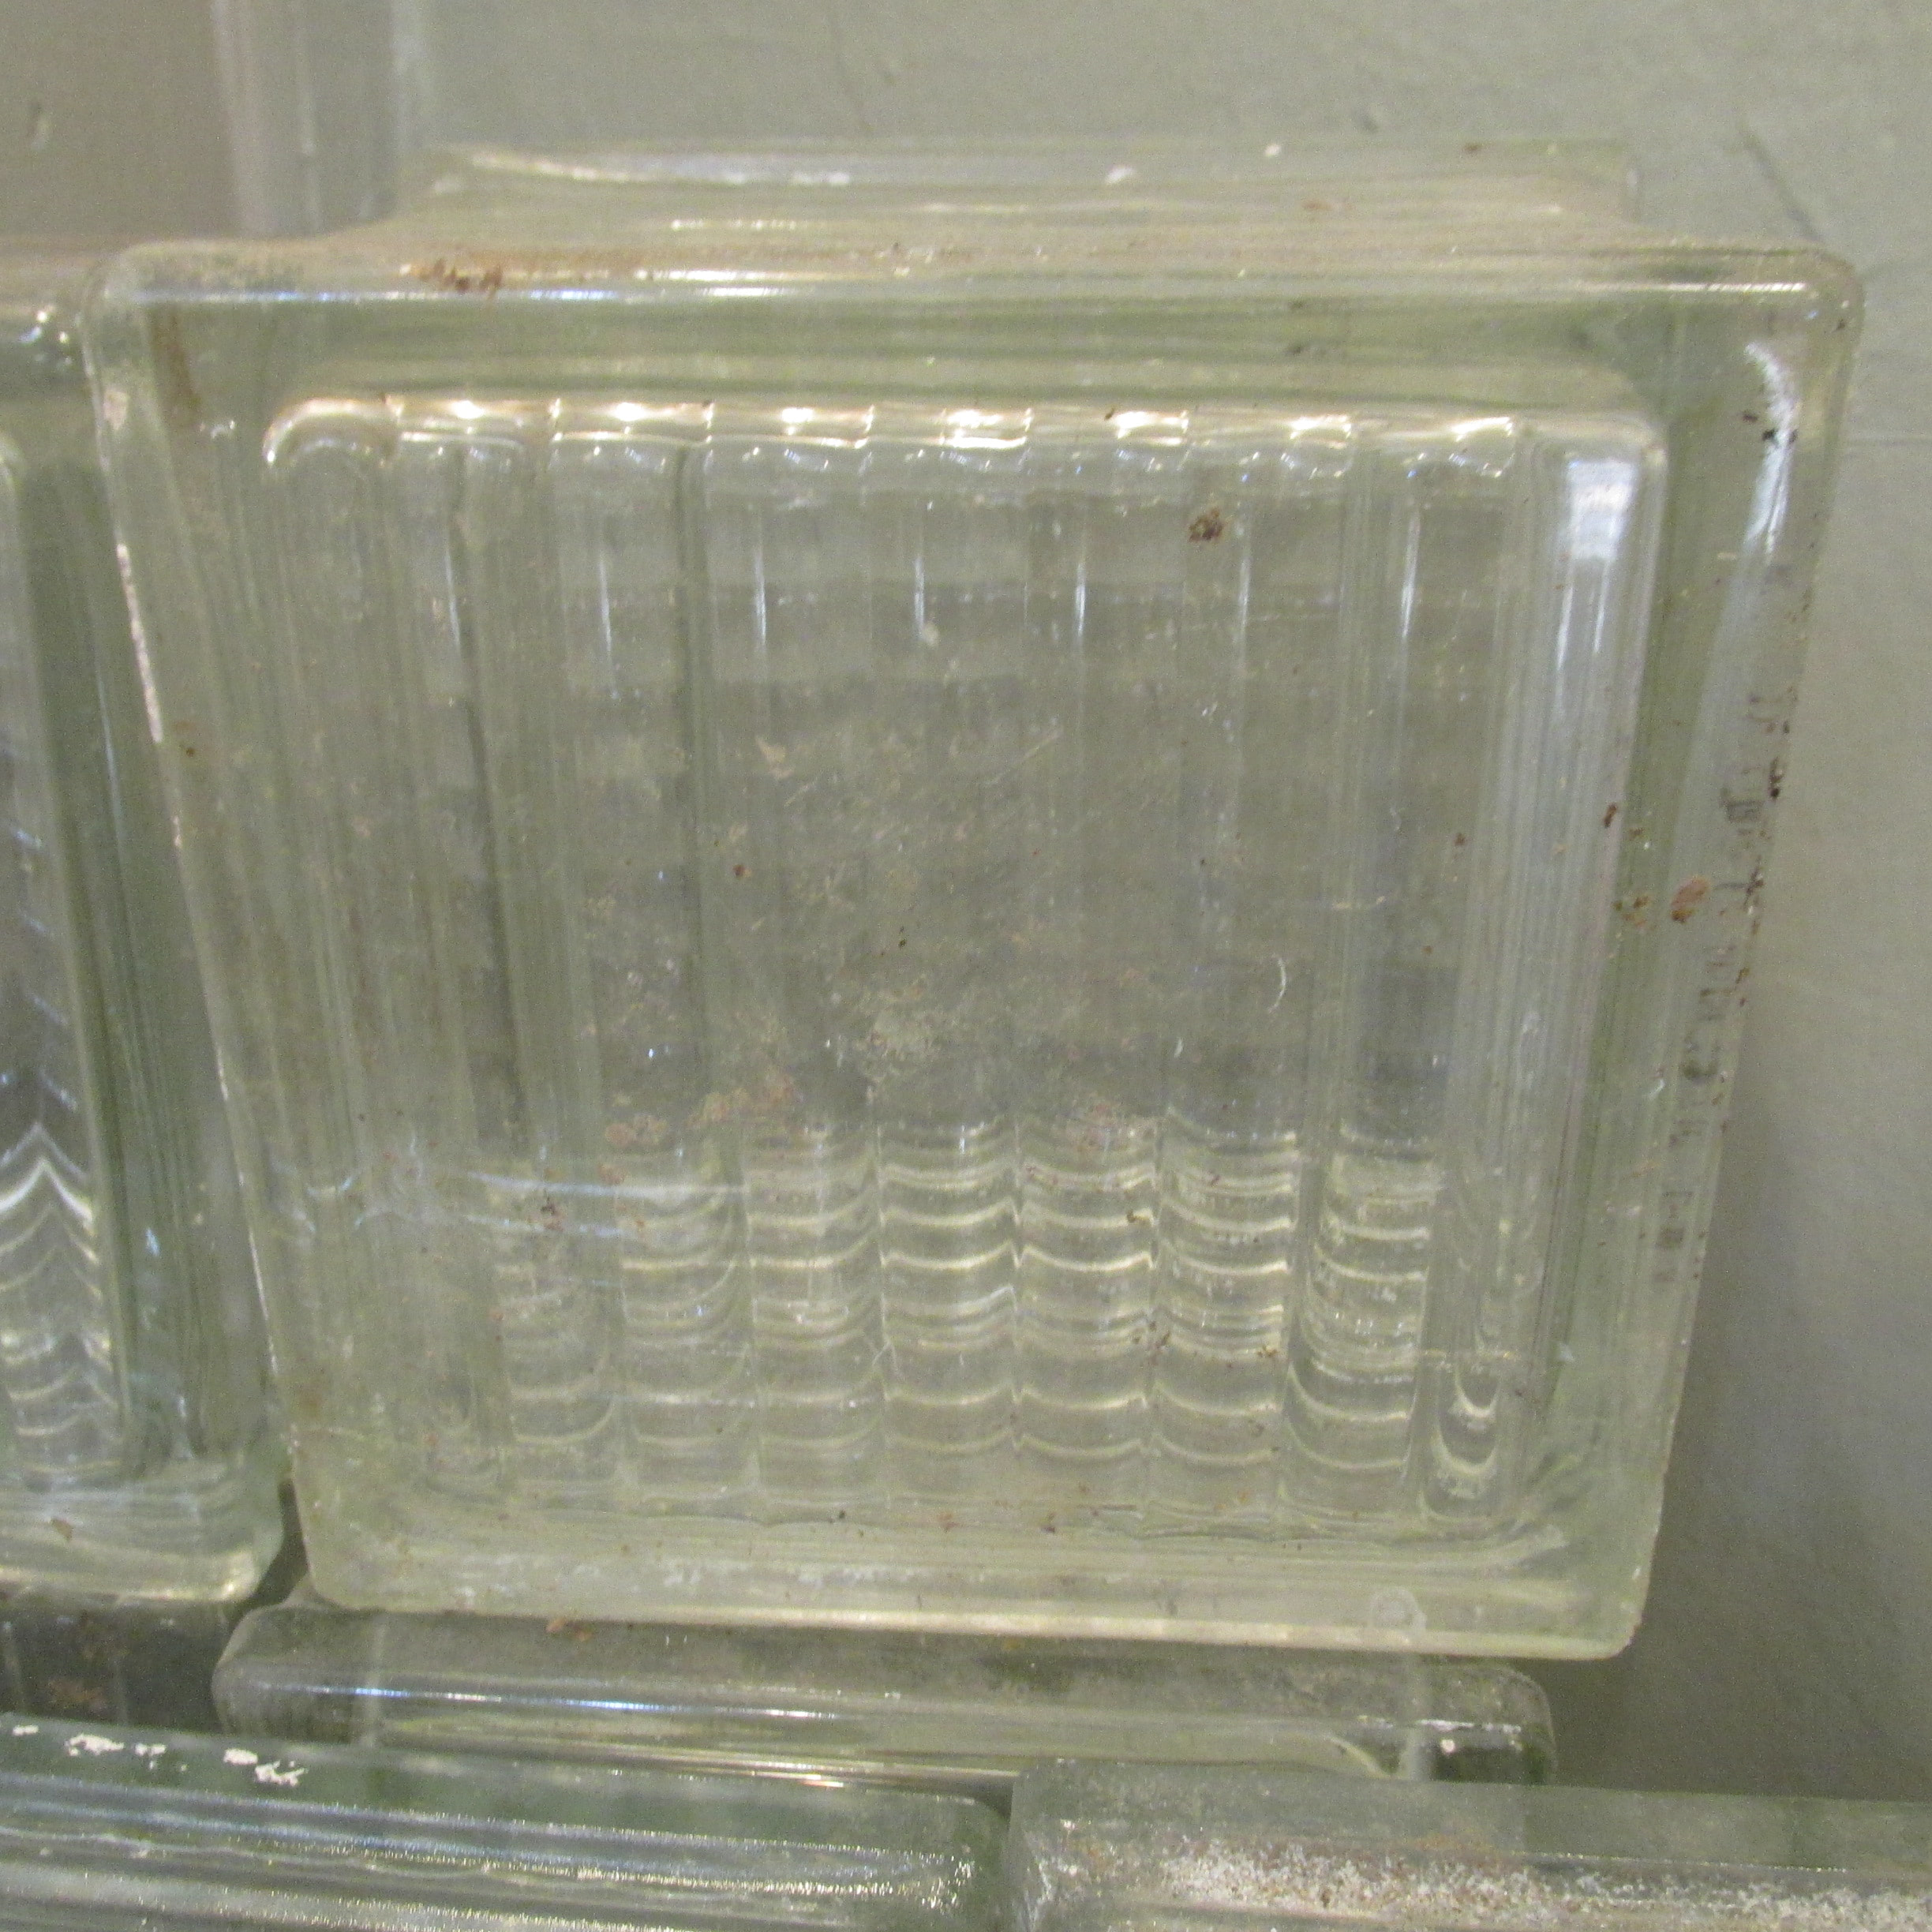 Clean Rare 6 x 6 x 4 Vintage Reclaimed Architectural Glass Block 